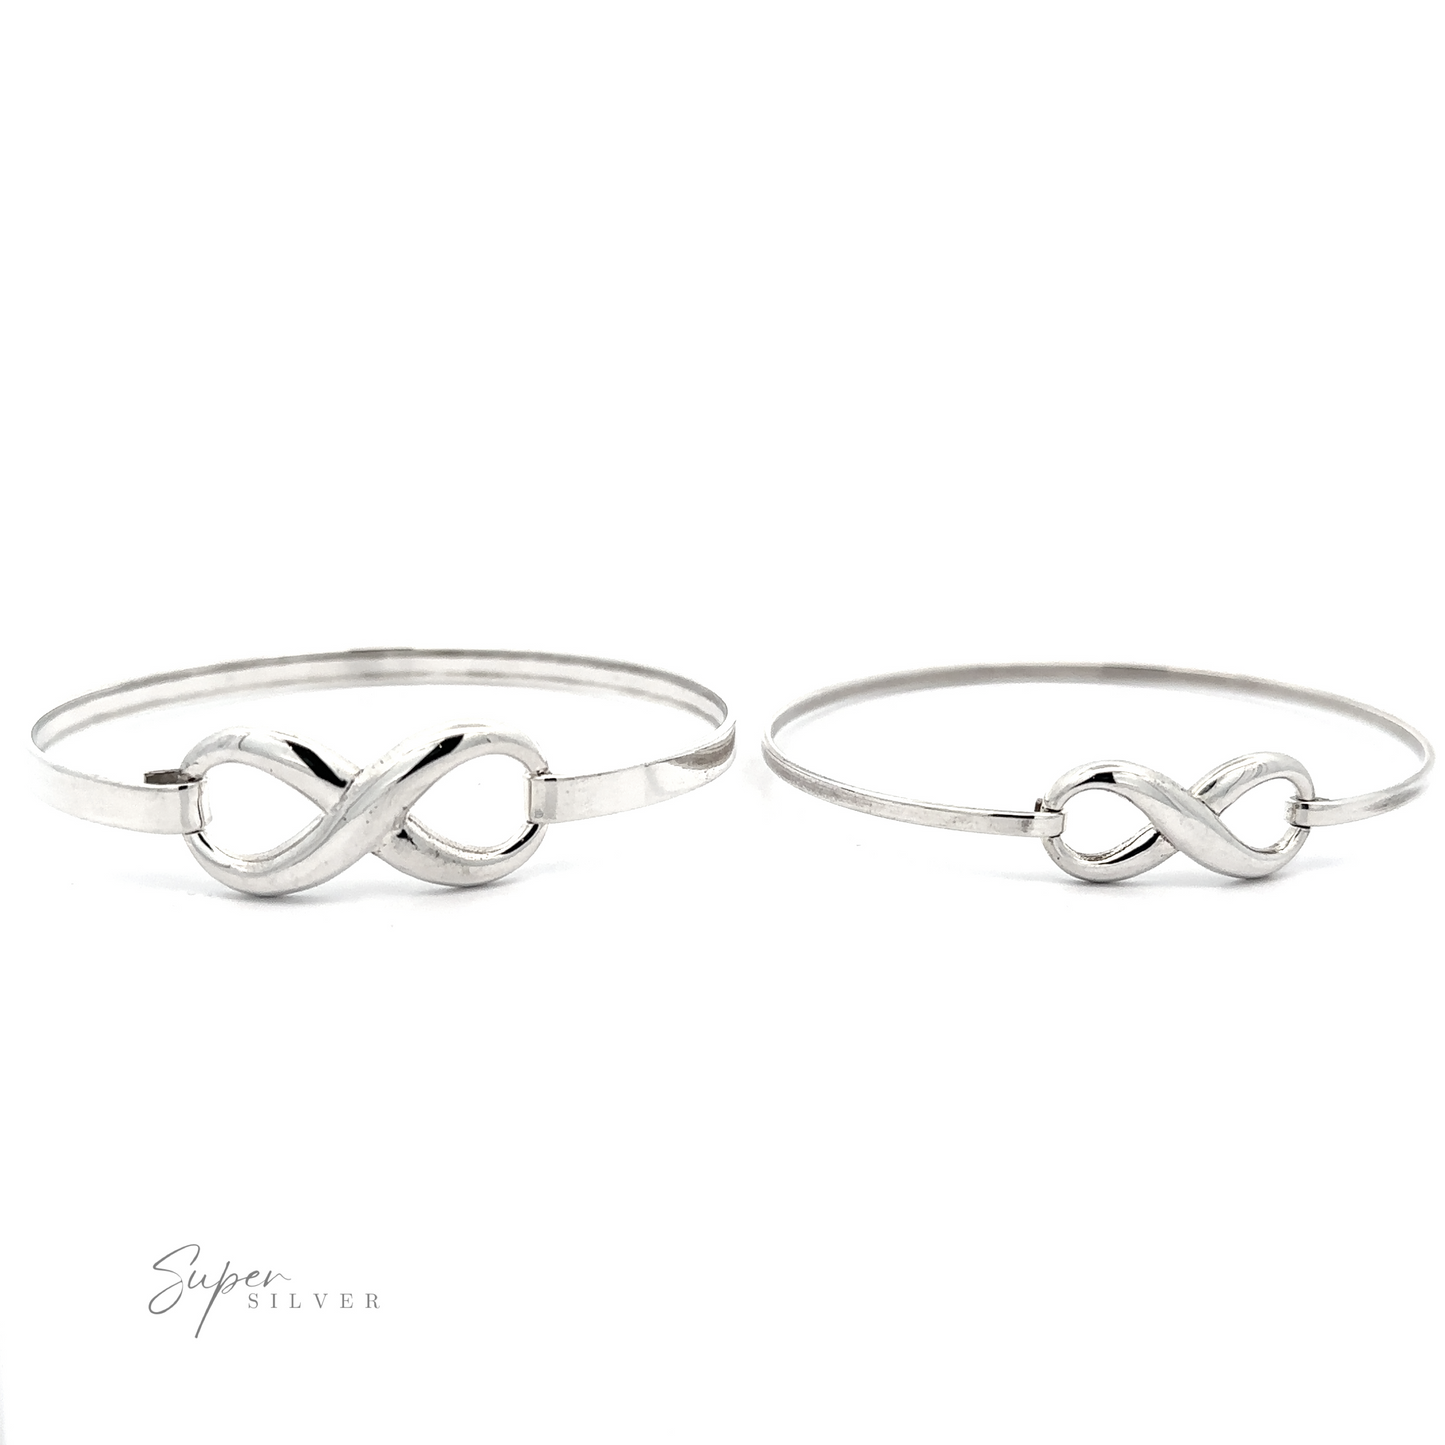 
                  
                    Two Infinity Bracelets with latch clasp on a white background. The left bracelet features a larger infinity symbol compared to the right one. Crafted from .925 Sterling Silver, these pieces exhibit timeless elegance. "Super Silver" logo in the bottom left corner.
                  
                